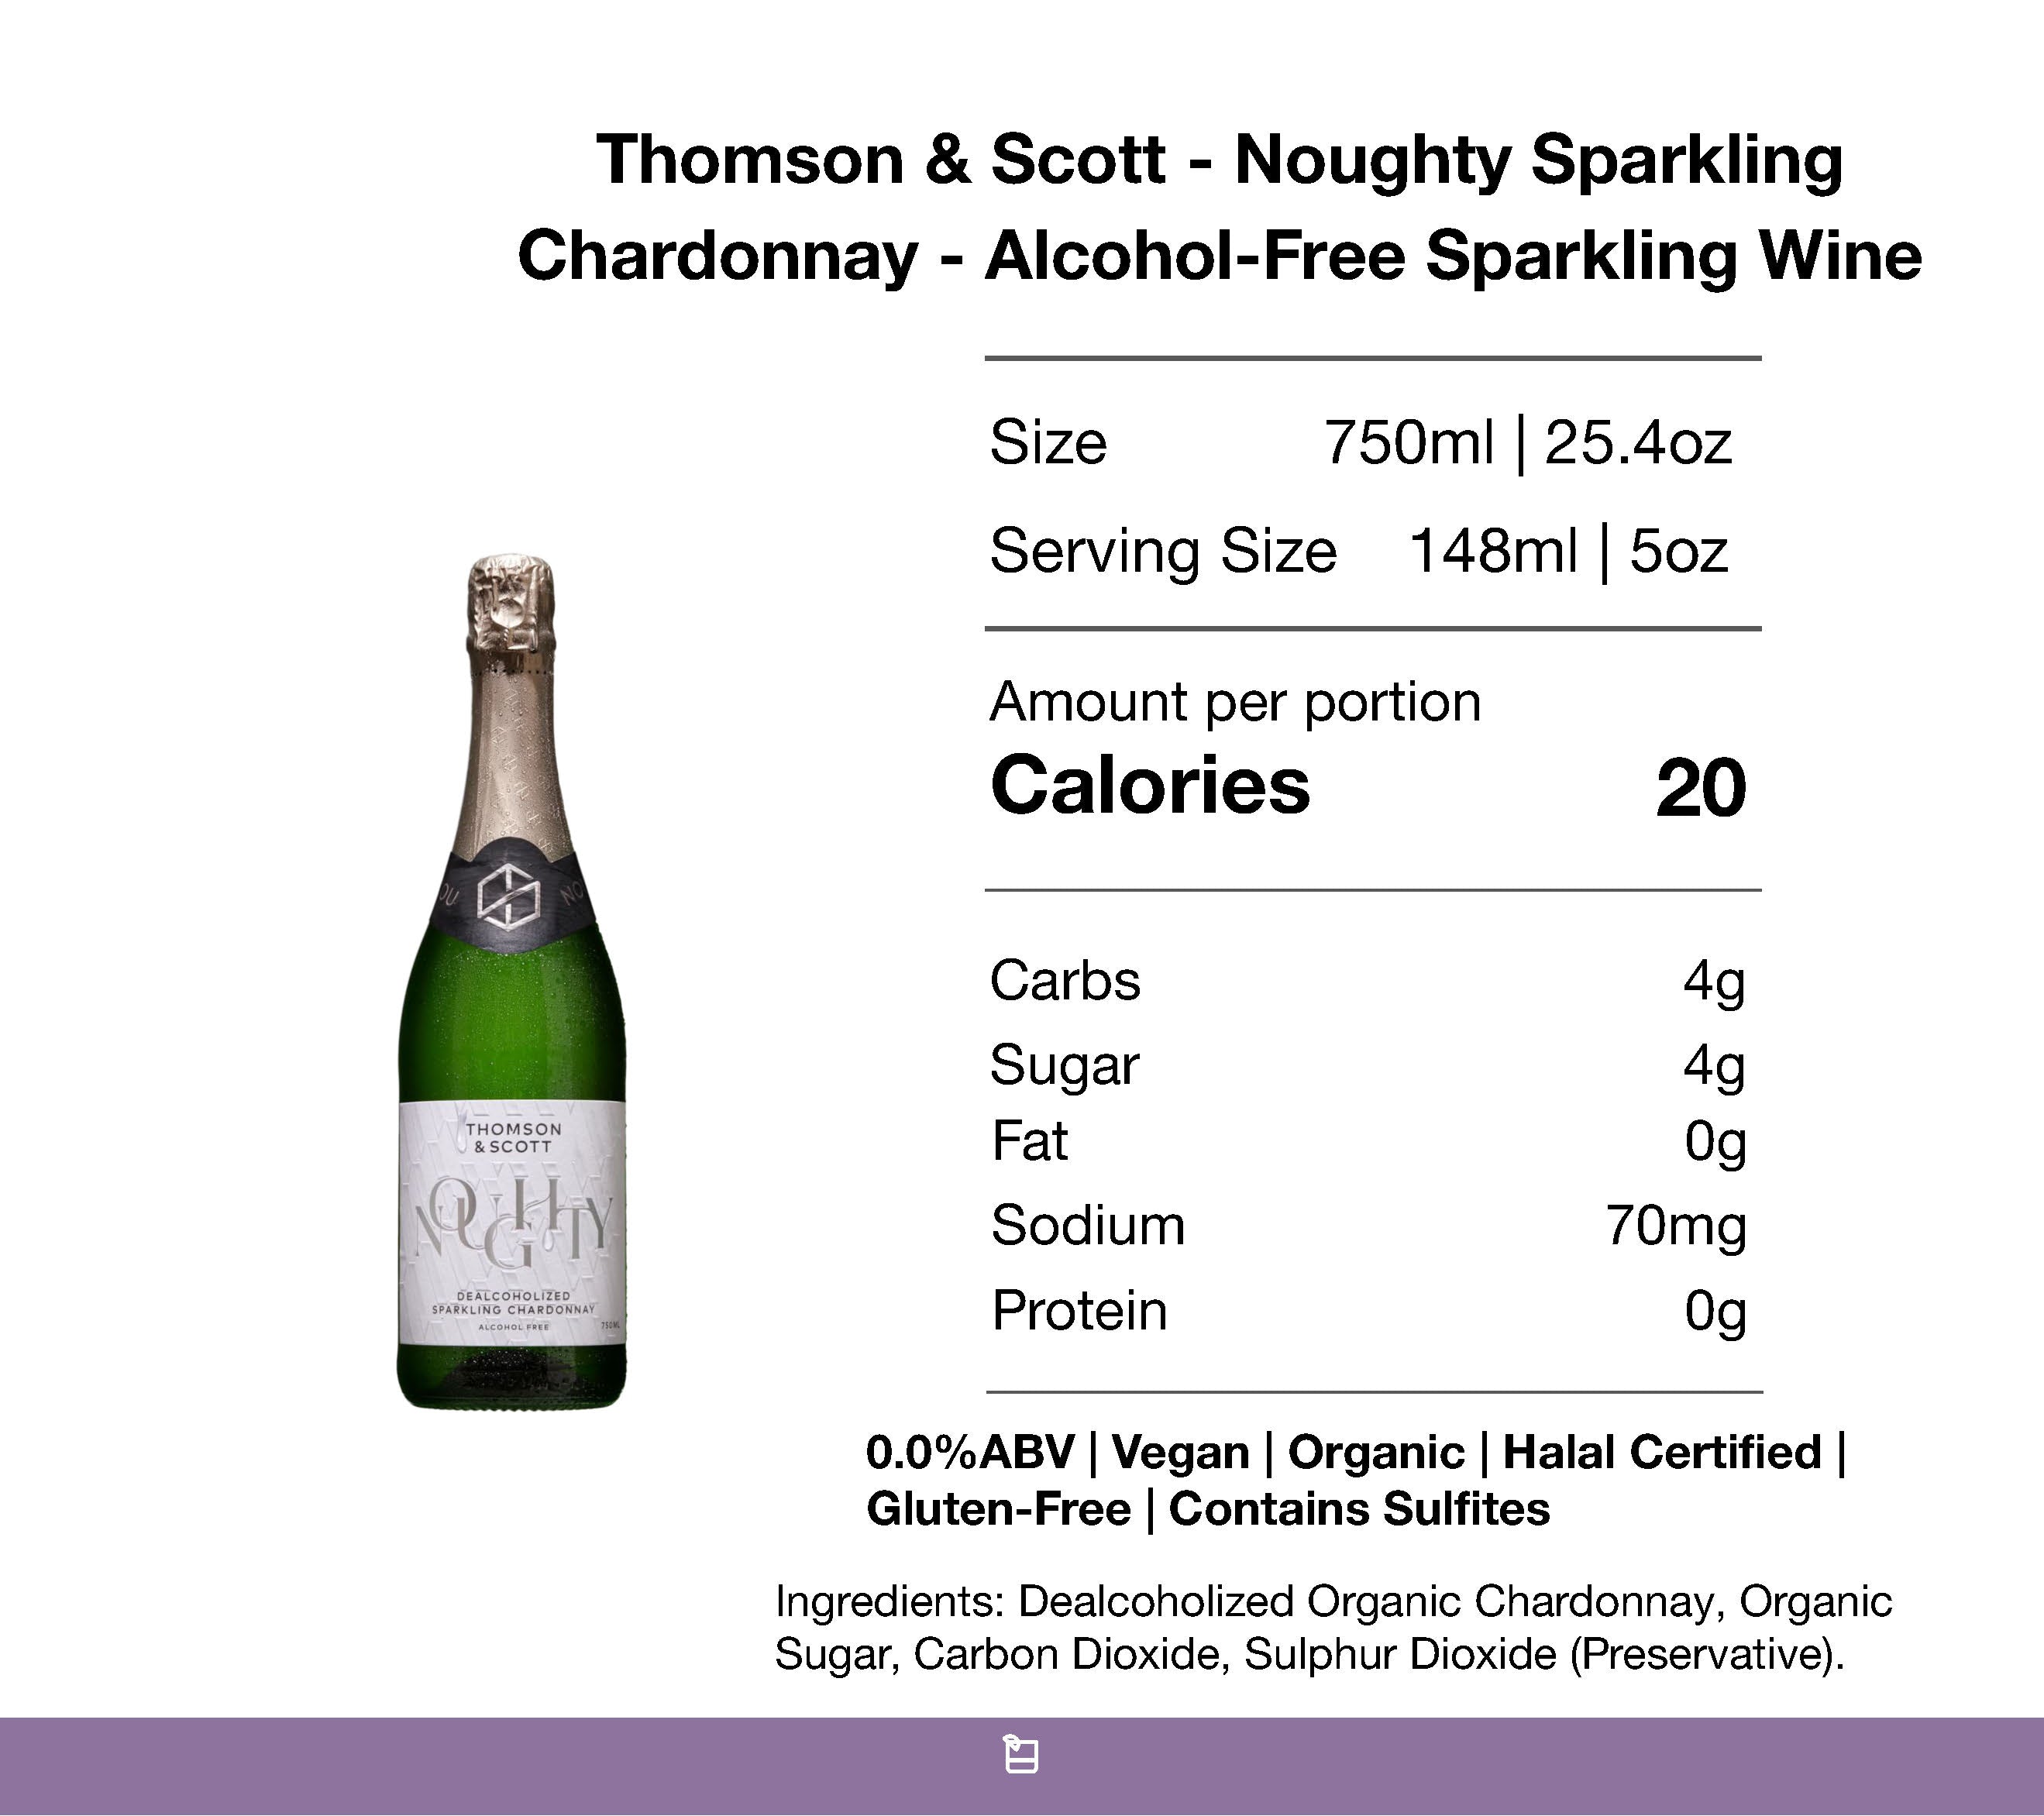 Buy Noughty Sparking Chardonnay